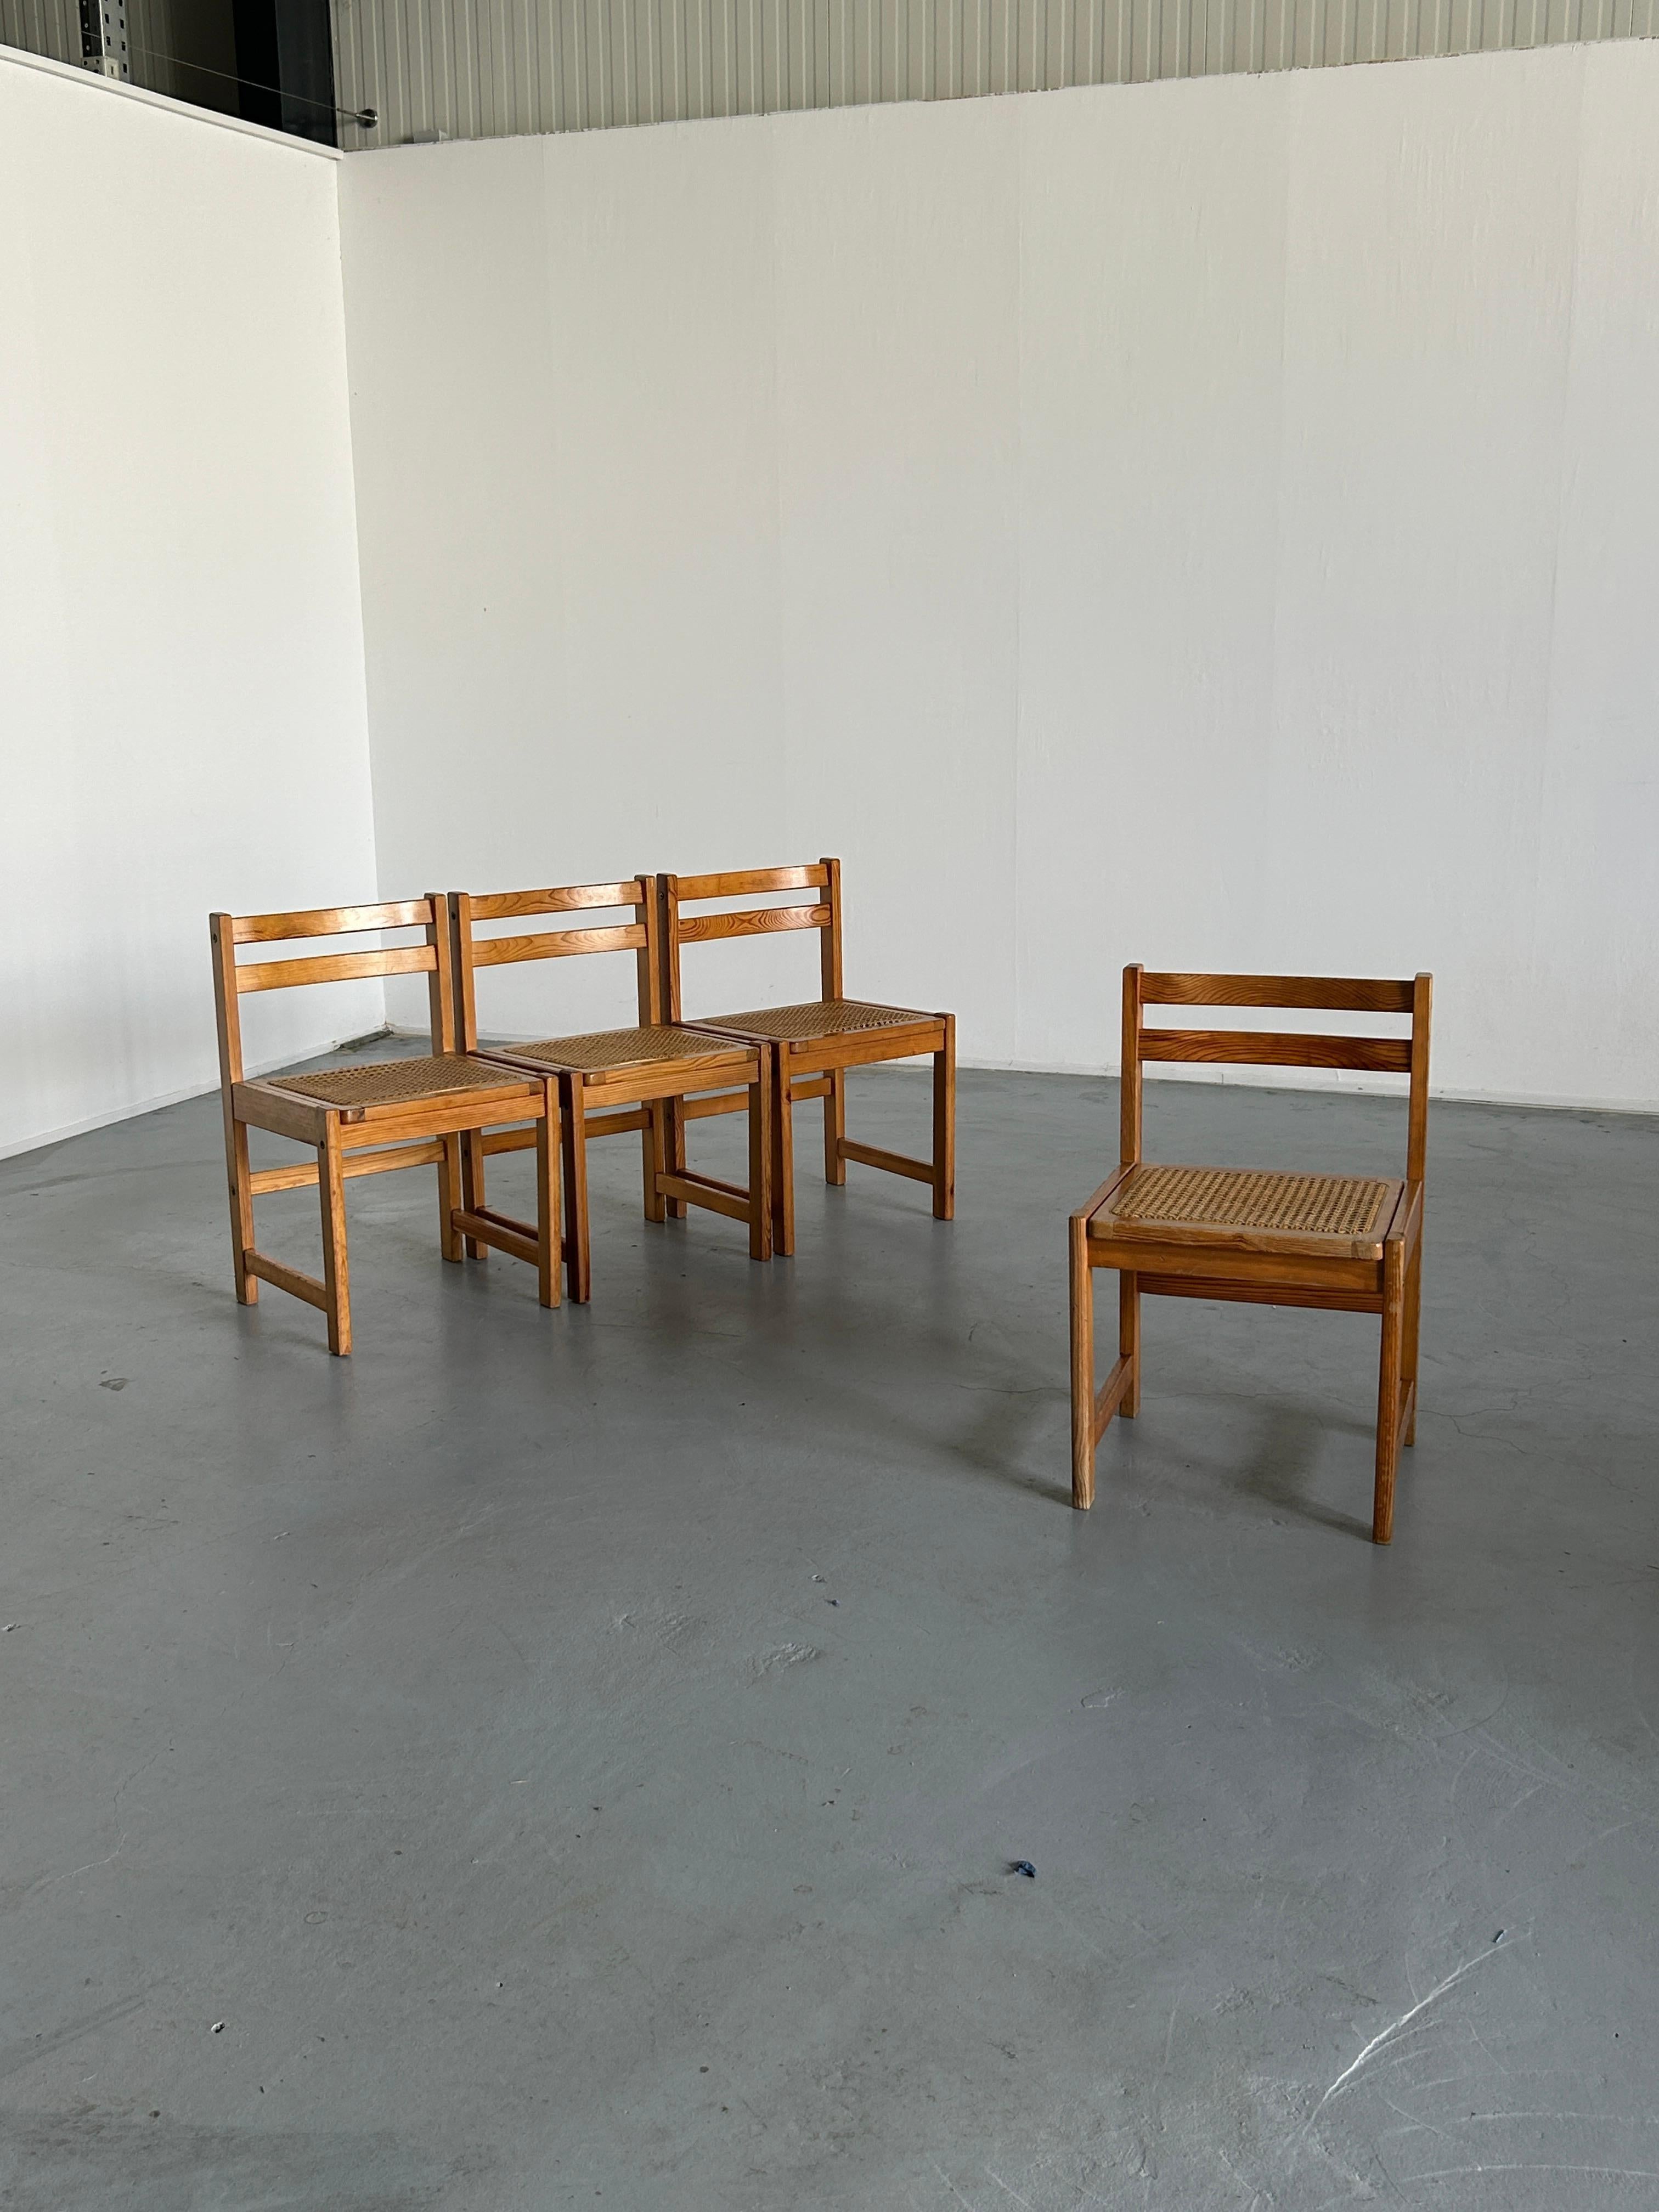 Set of 4 Vintage Mid-Century Modern Wooden Dining Chairs in Beech and Cane, 60s 1